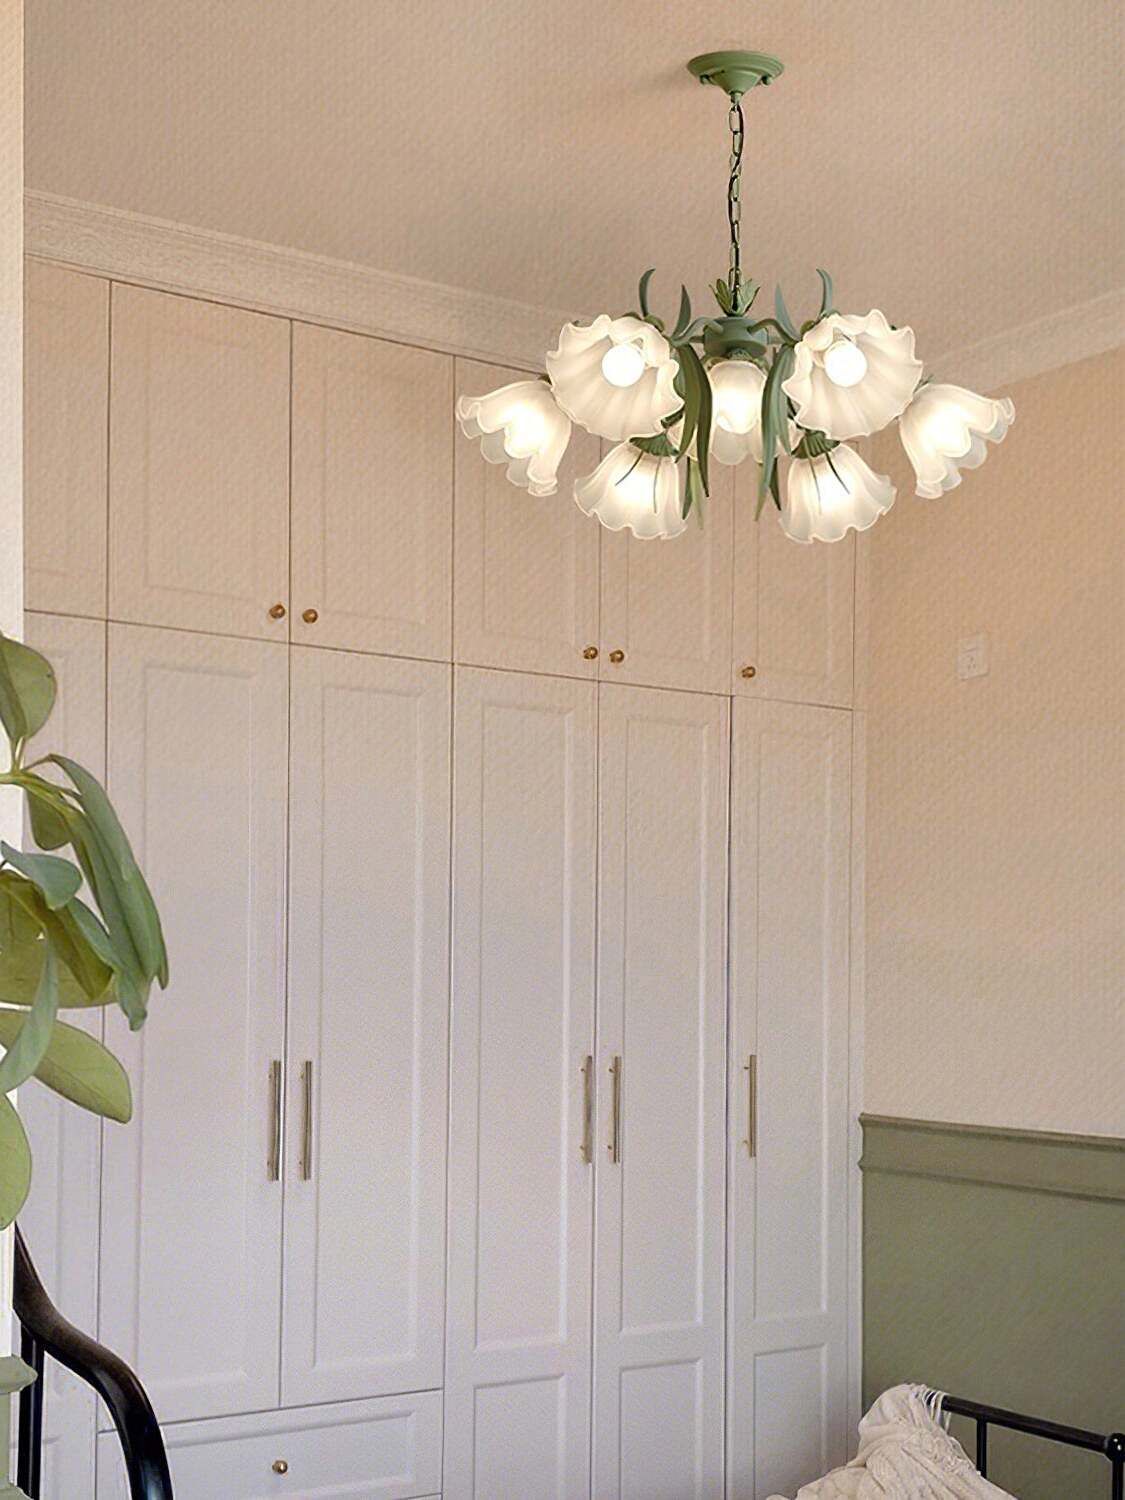 Shabby Chic Chandeliers Elegant Lighting for Vintage-Inspired Spaces